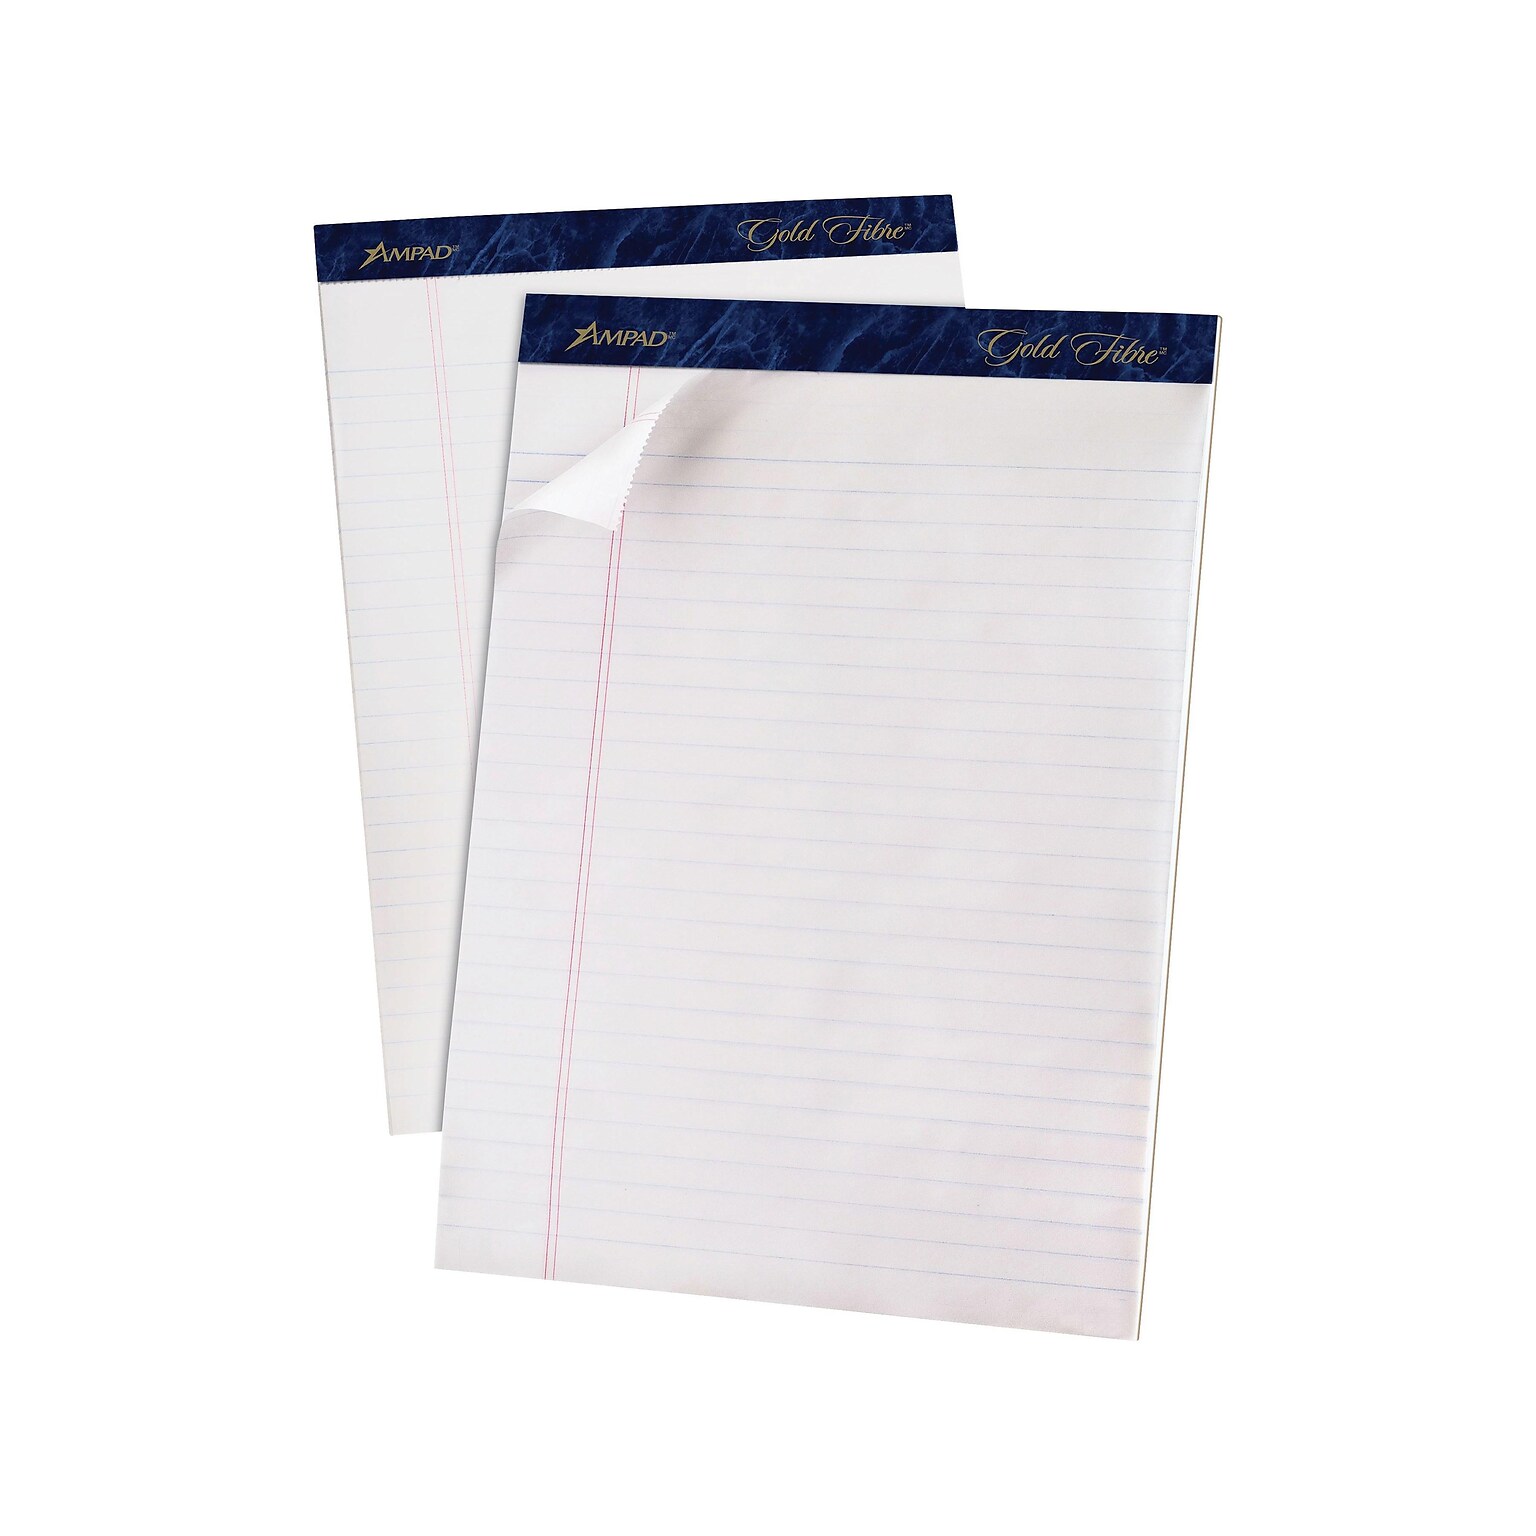 Ampad Gold Fibre Notepads, 8.5 x 11.75, Wide Ruled, White, 50 Sheets/Pad, 12 Pads/Pack (TOP 20-070)